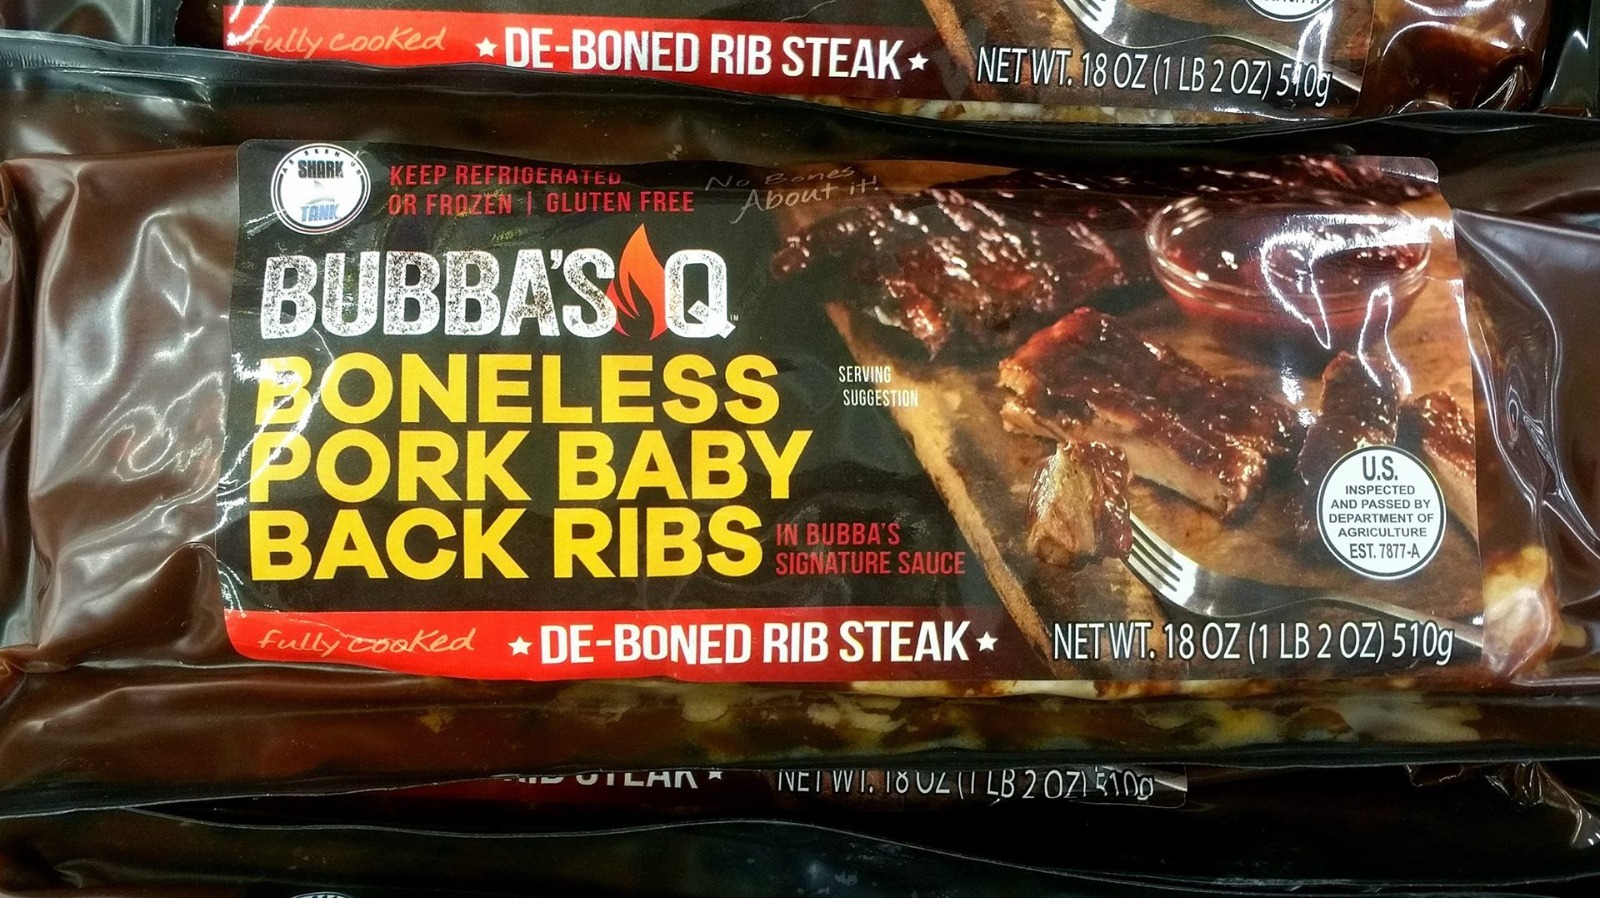 What Happened To Bubba's Q Boneless Ribs After Shark Tank?